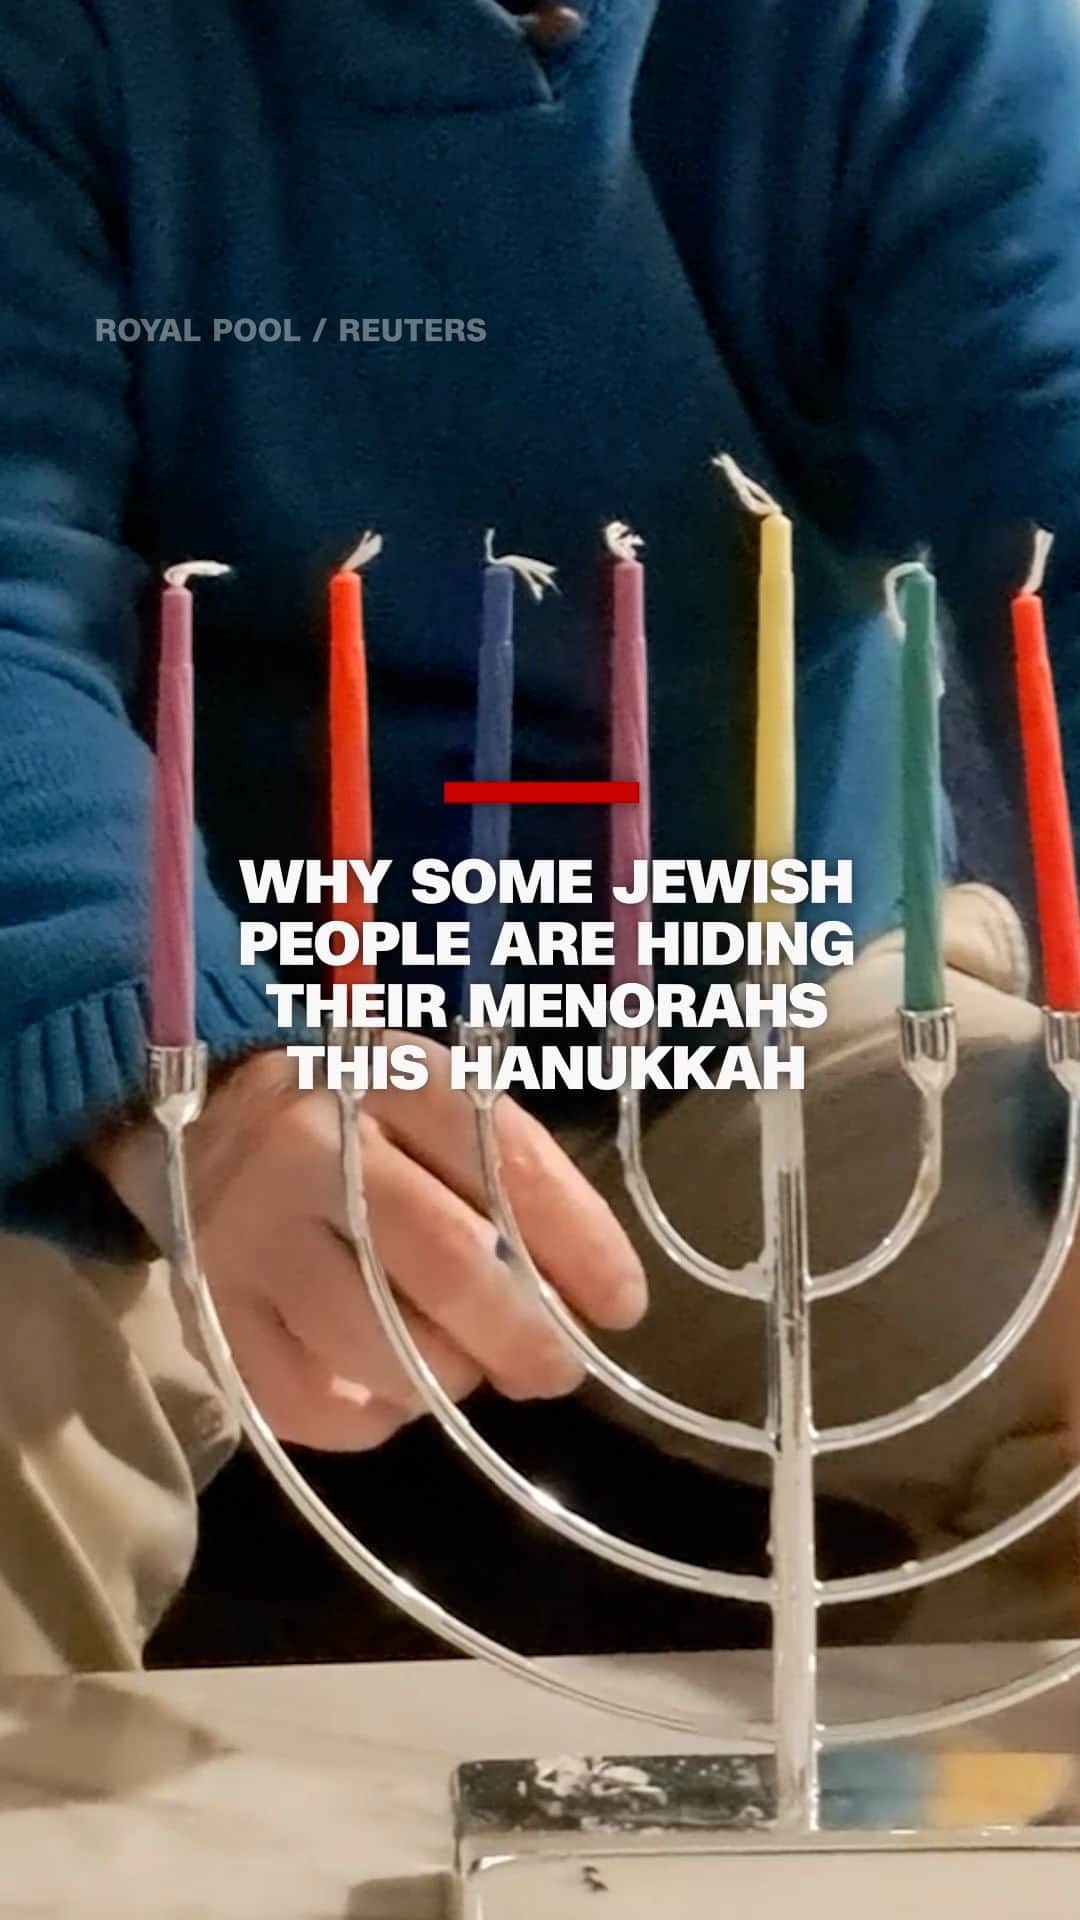 CNNのインスタグラム：「Ahead of the first night of Hanukkah, CNN asked Jewish people to share how their approach to displaying a menorah, the lit candelabra traditionally placed in the windows of Jewish households, has changed this year amid reports antisemitism in the US is reaching historic levels.  Participants, given fears of antisemitic attacks, asked to be identified by their first names only.  More at the link in our bio.」